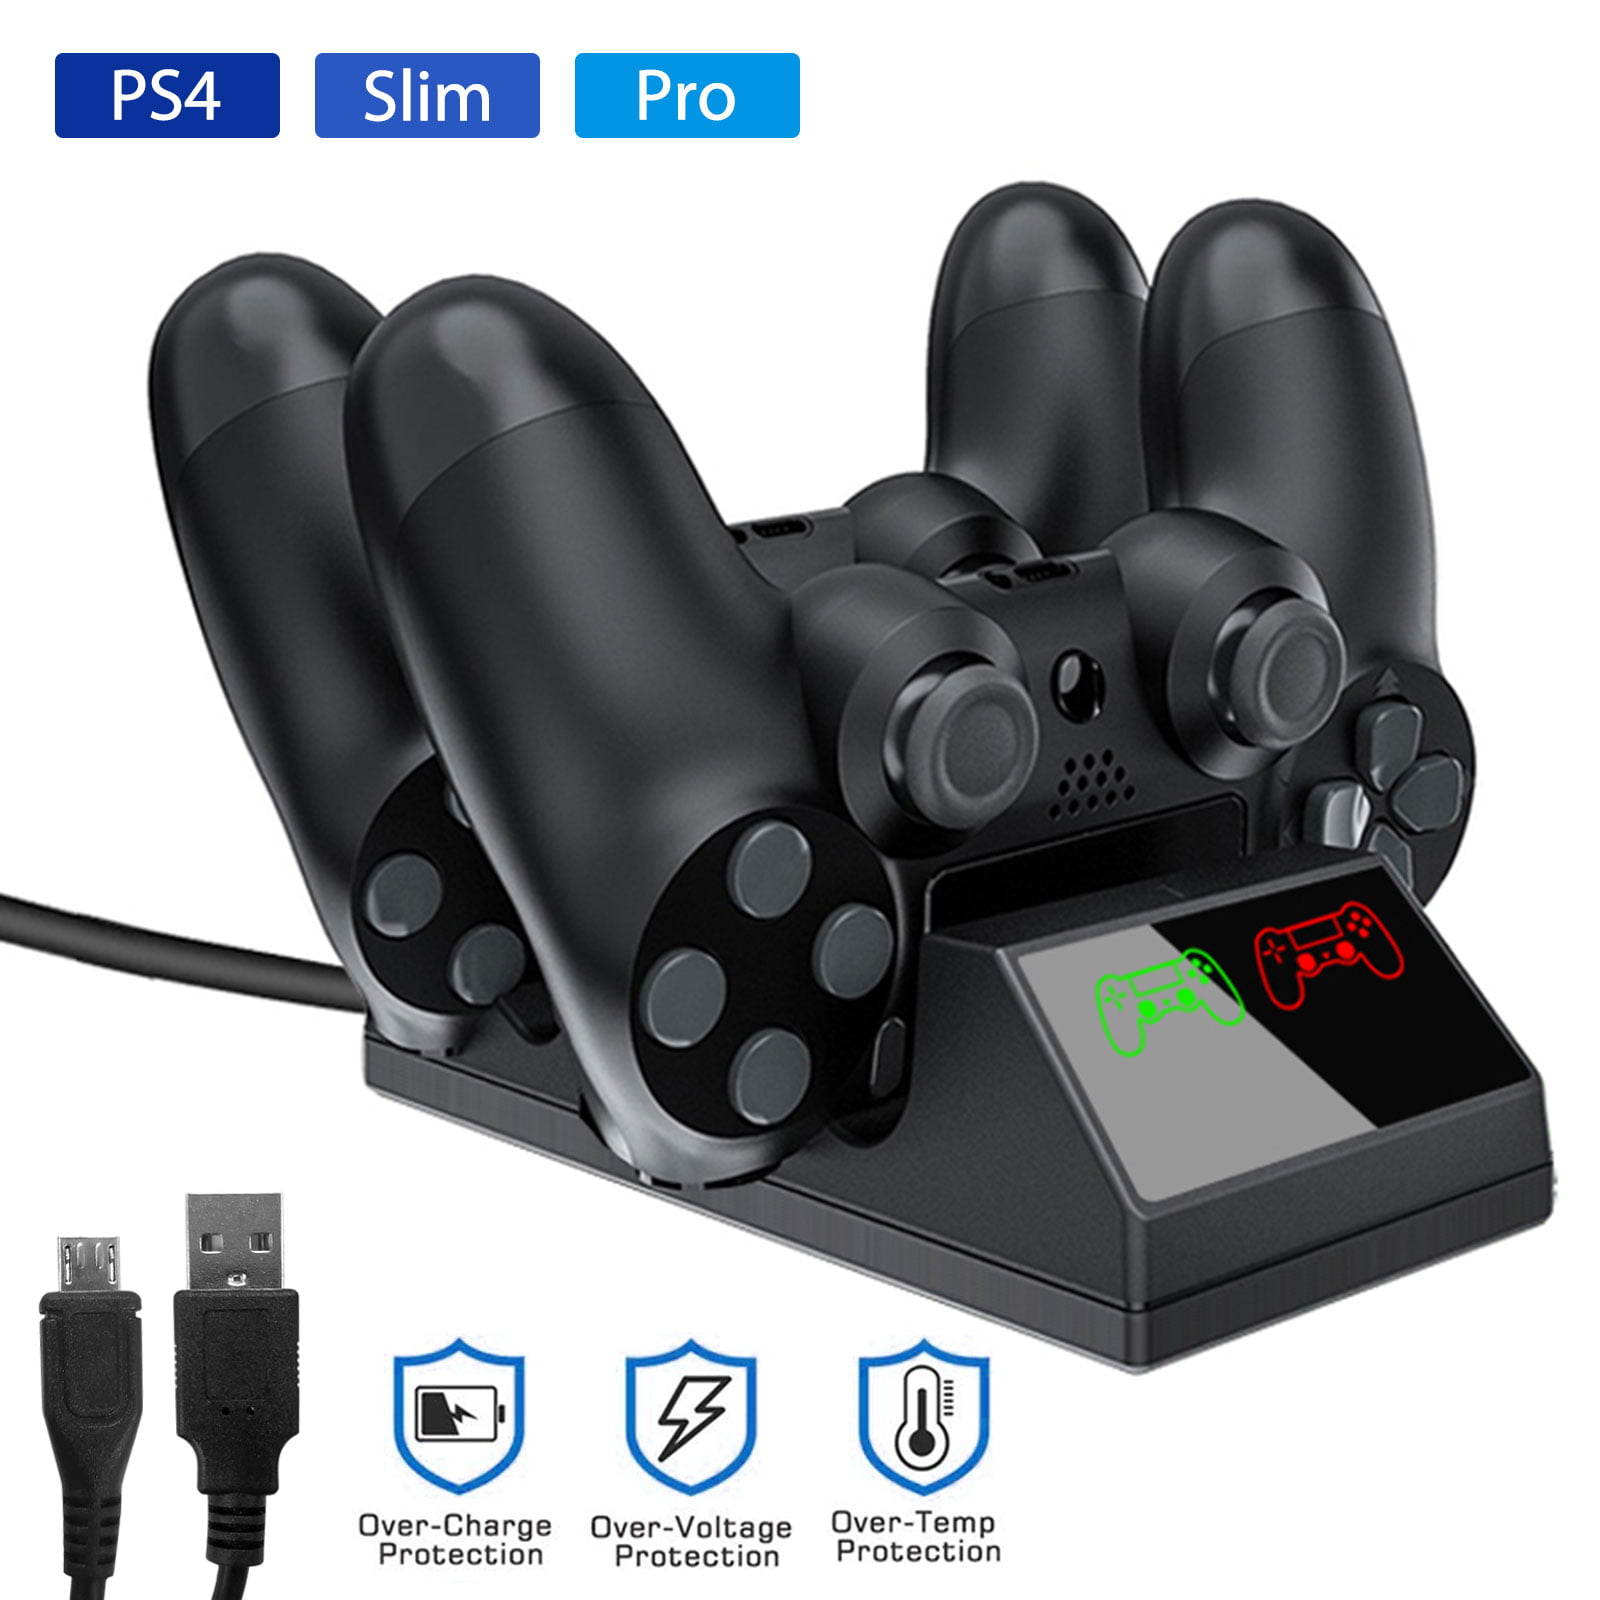 PS4 Controller Charger, EEEkit PS4 USB Charger Dual USB Fast Charging for Sony Playstation 4/PS4/ Pro /PS4 Slim Controller, Dual Shock 4 Charging Station with LED Indicator, Black